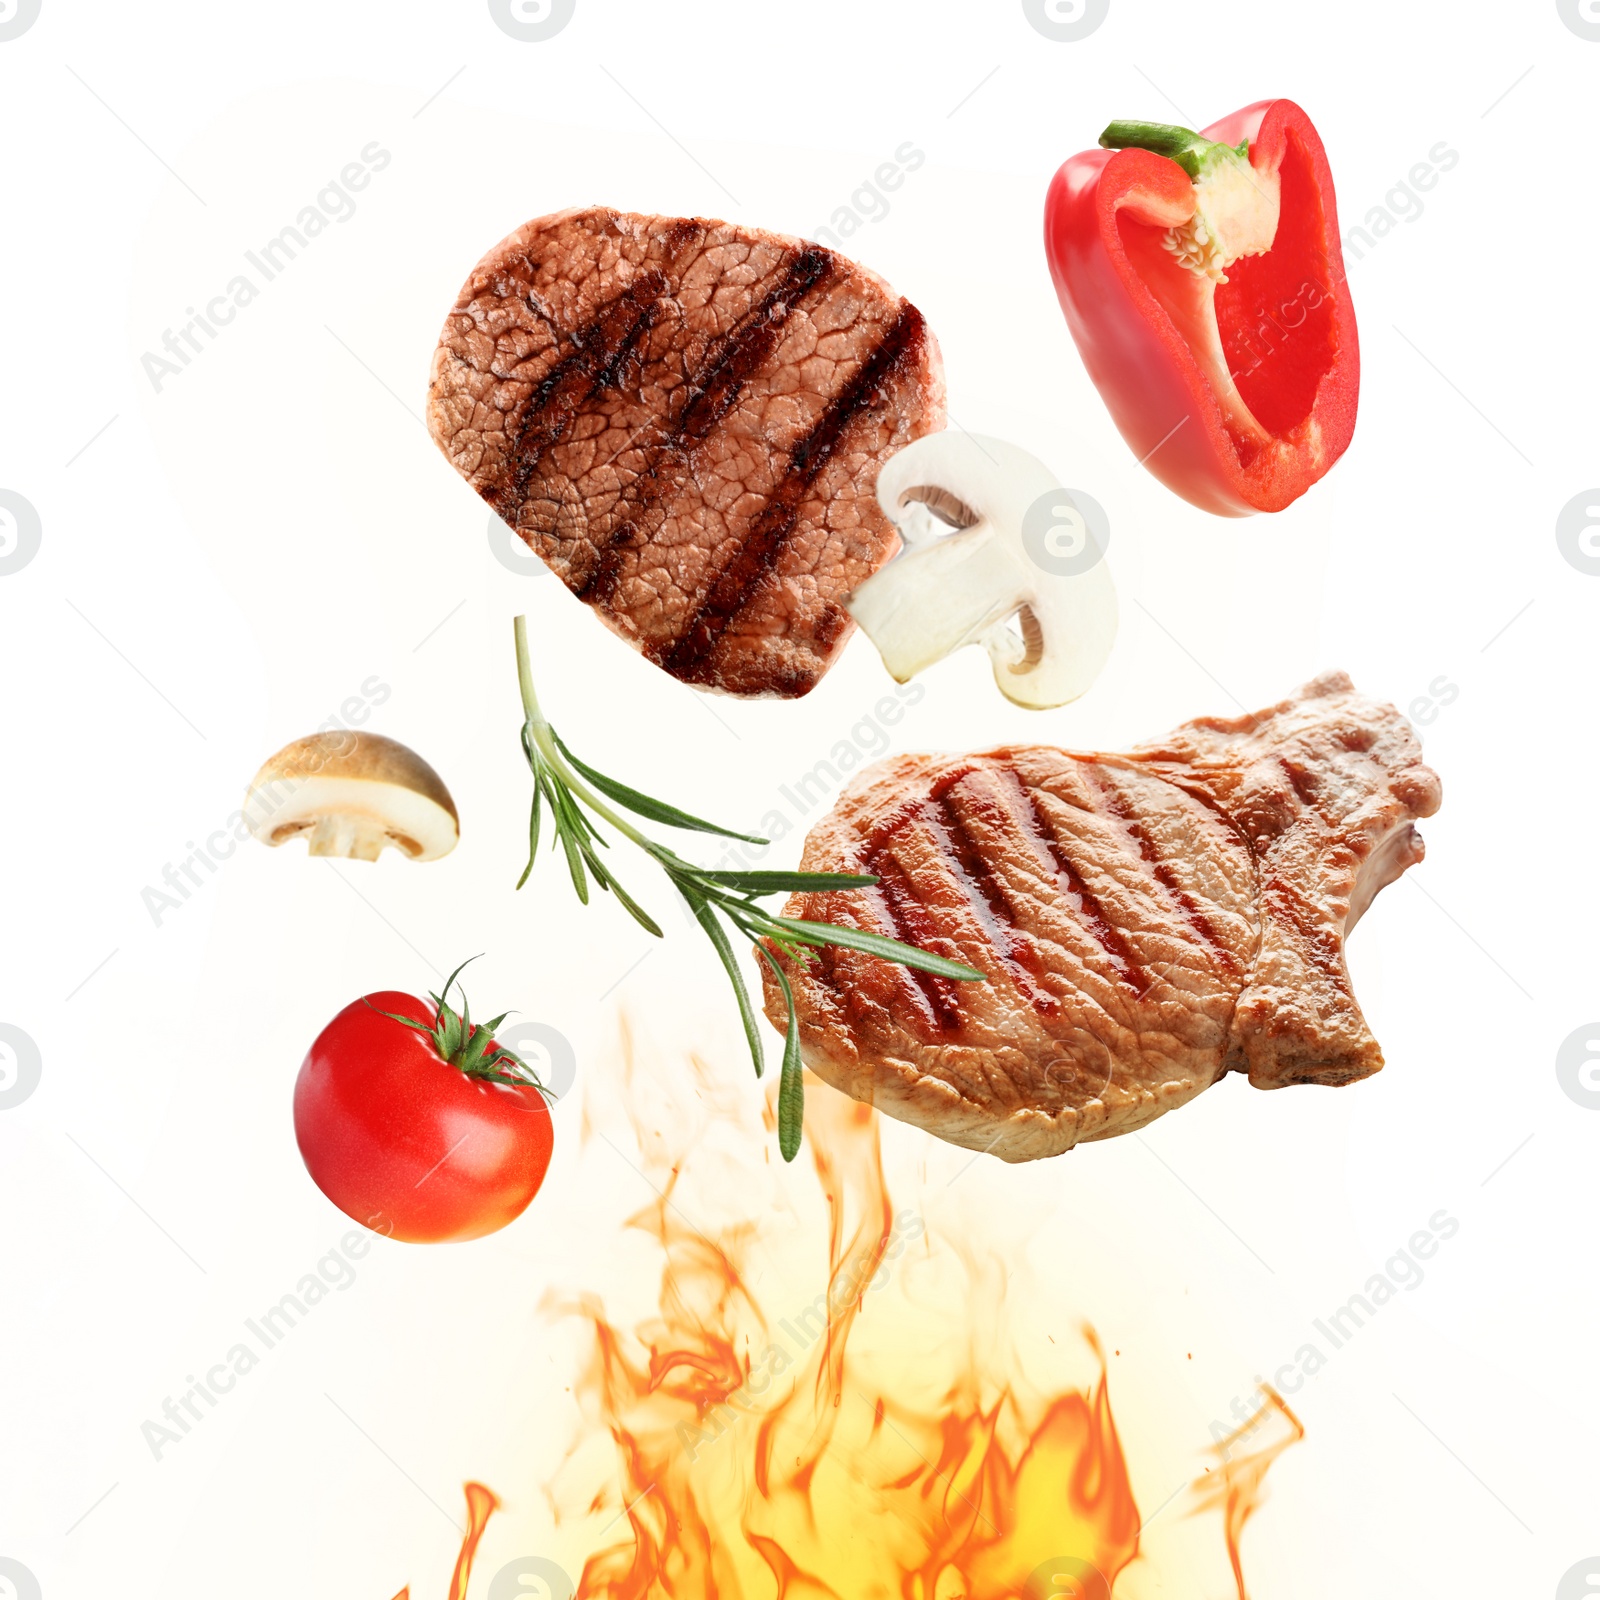 Image of Tasty grilled meat, different vegetables and fire flame on white background